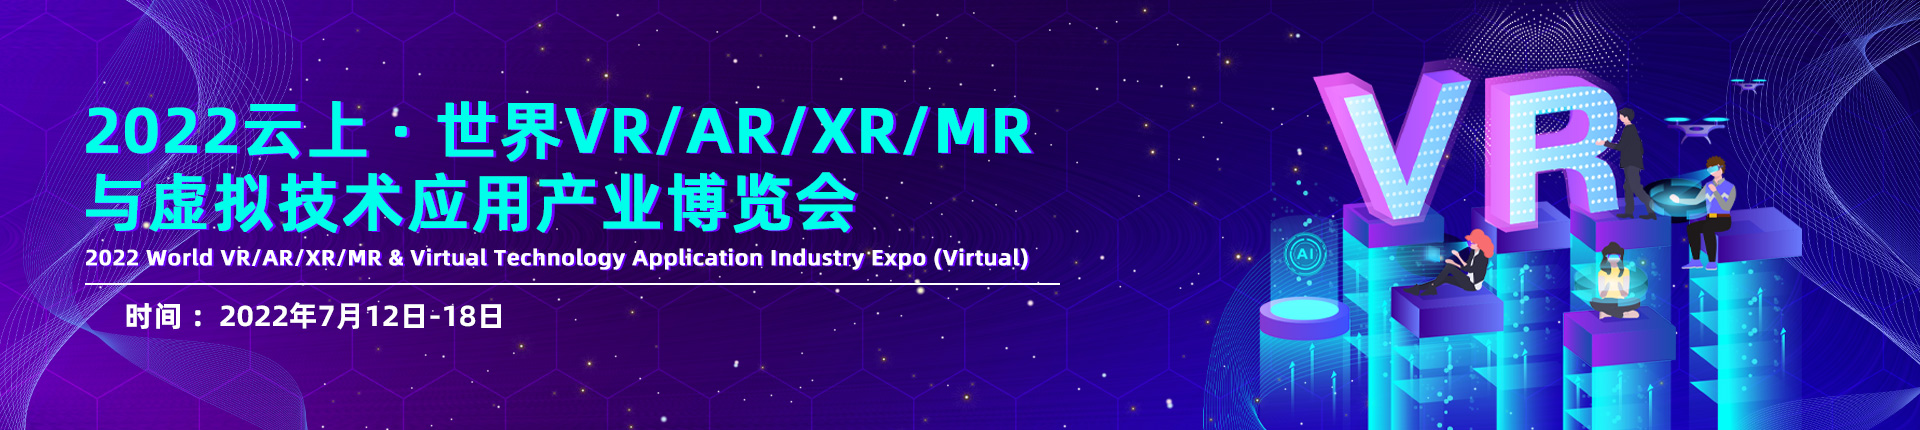 2022 World VR/AR/XR/MR and Virtual Technology Application Industry Expo (Virtual)